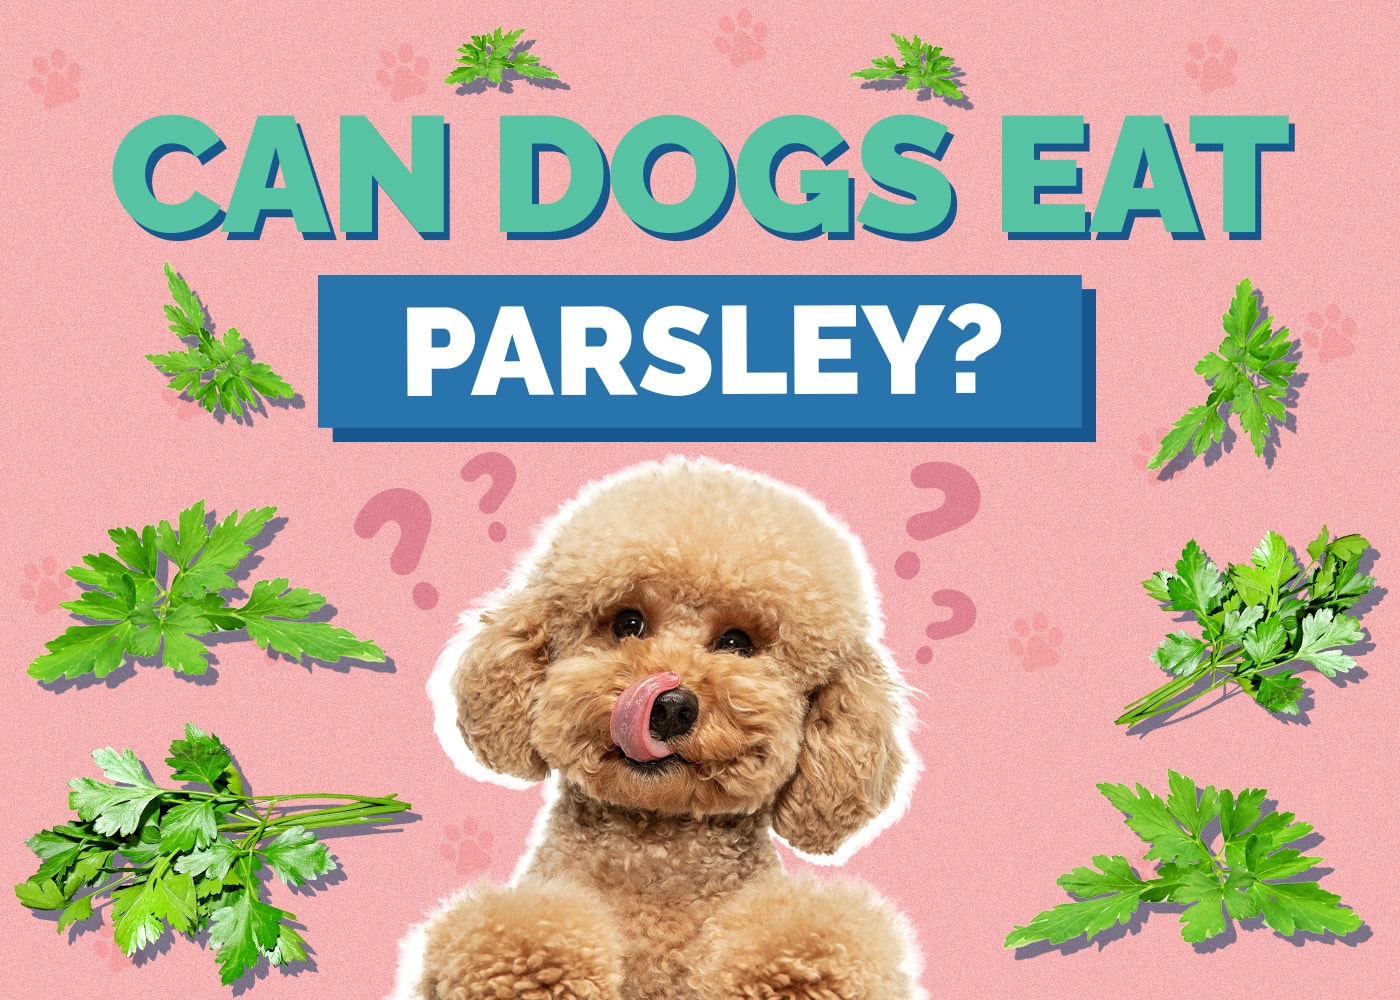 Can Dogs Eat parsley